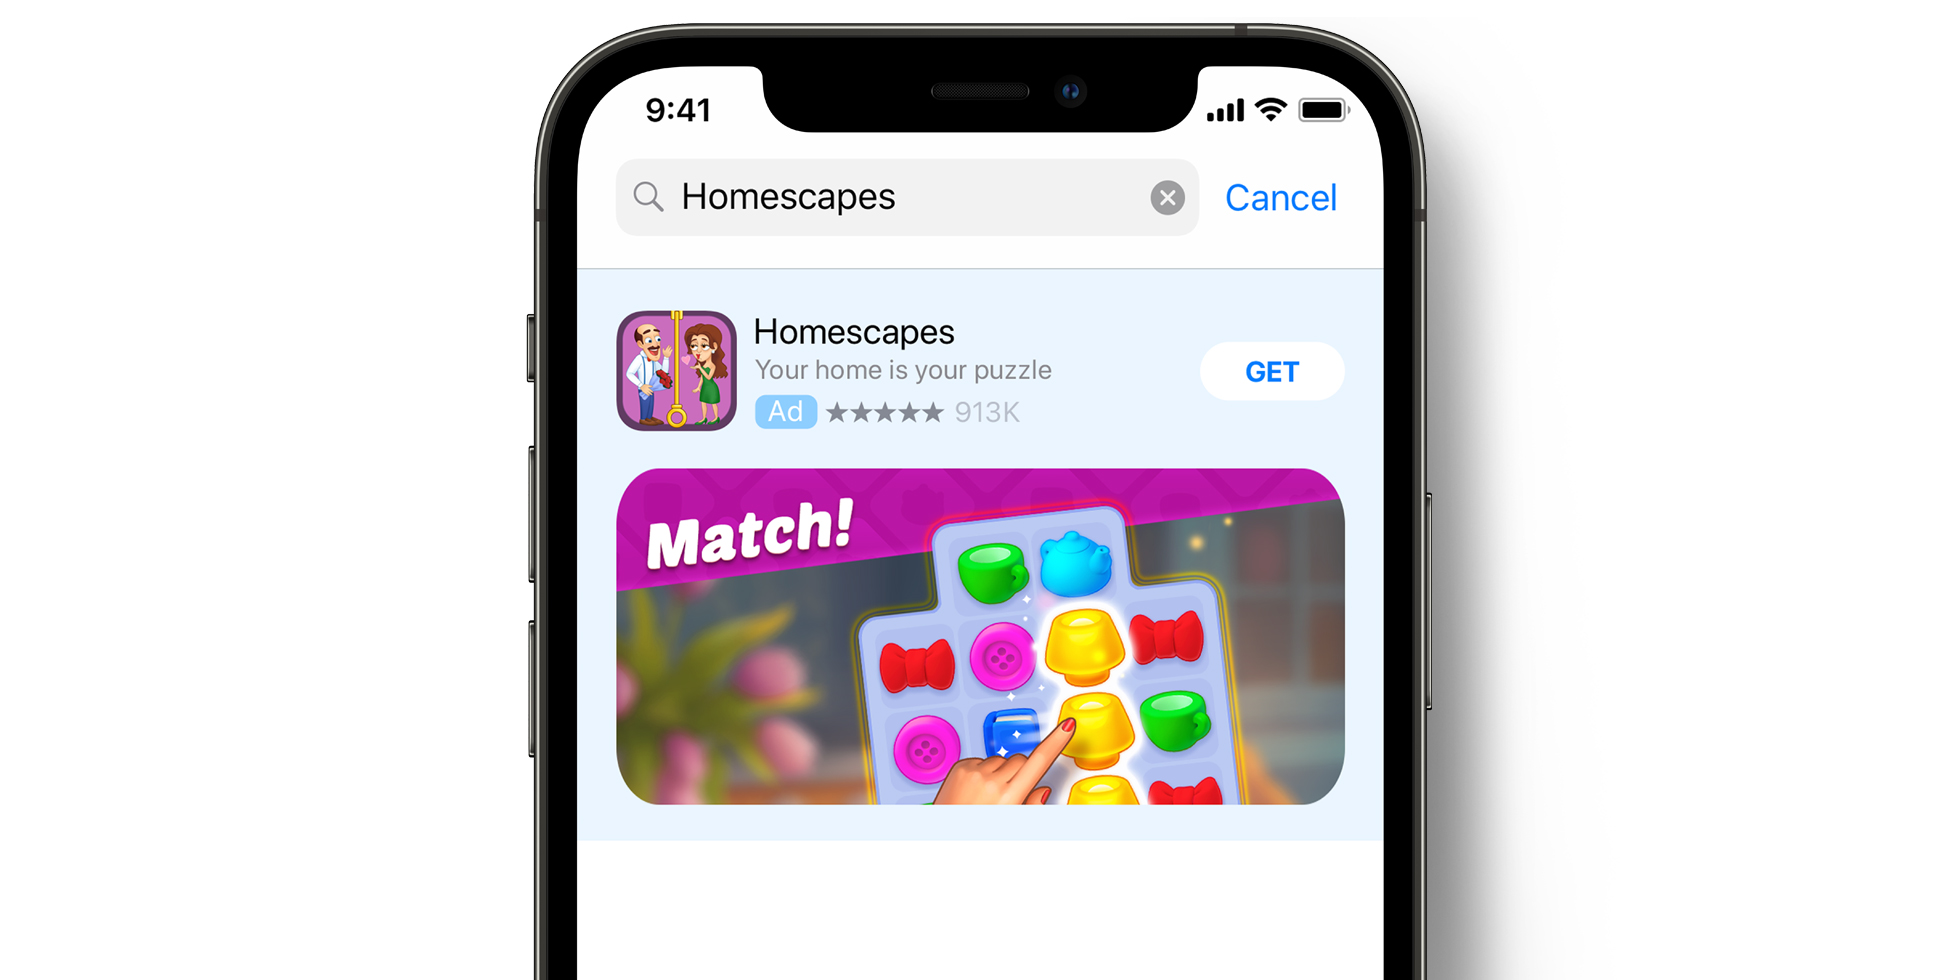 Homescapes 在 App Store 中的 Apple Search Ads 广告